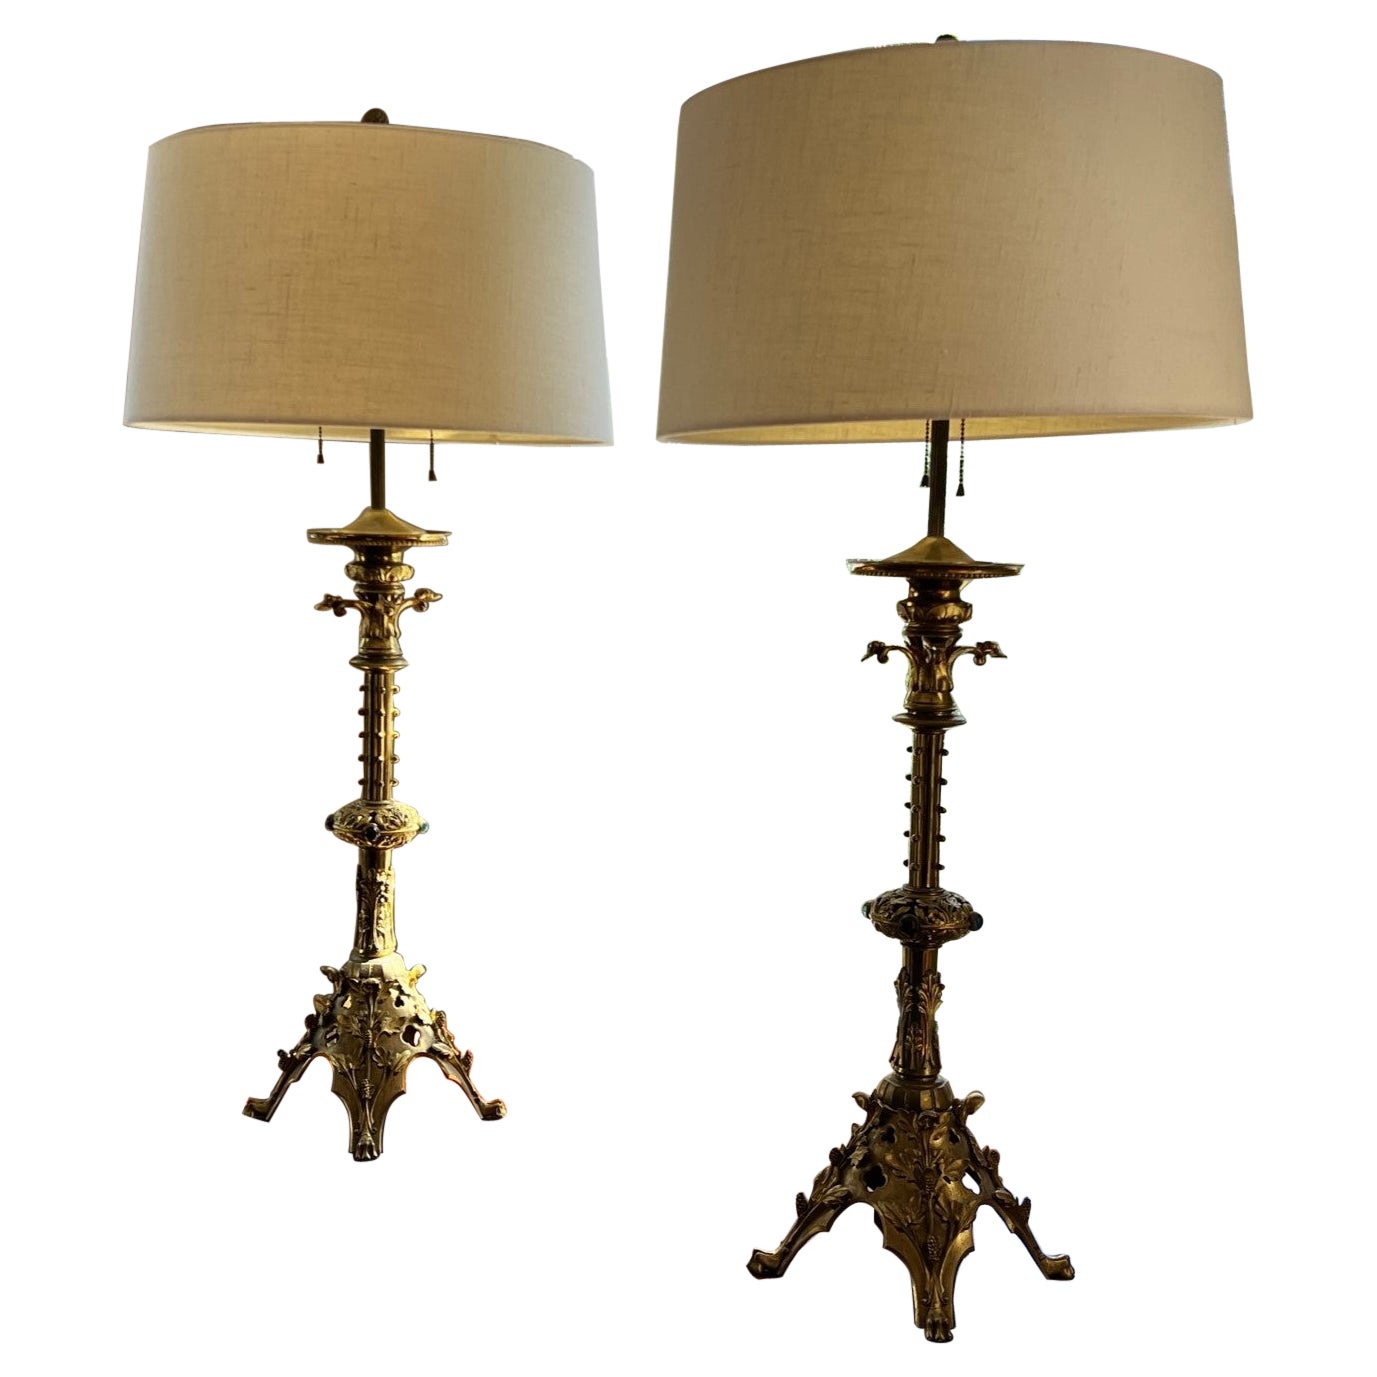 Large Ornate Pair of Gothic Revival Jeweled Bronze Lamps with Linen Drum Shades For Sale